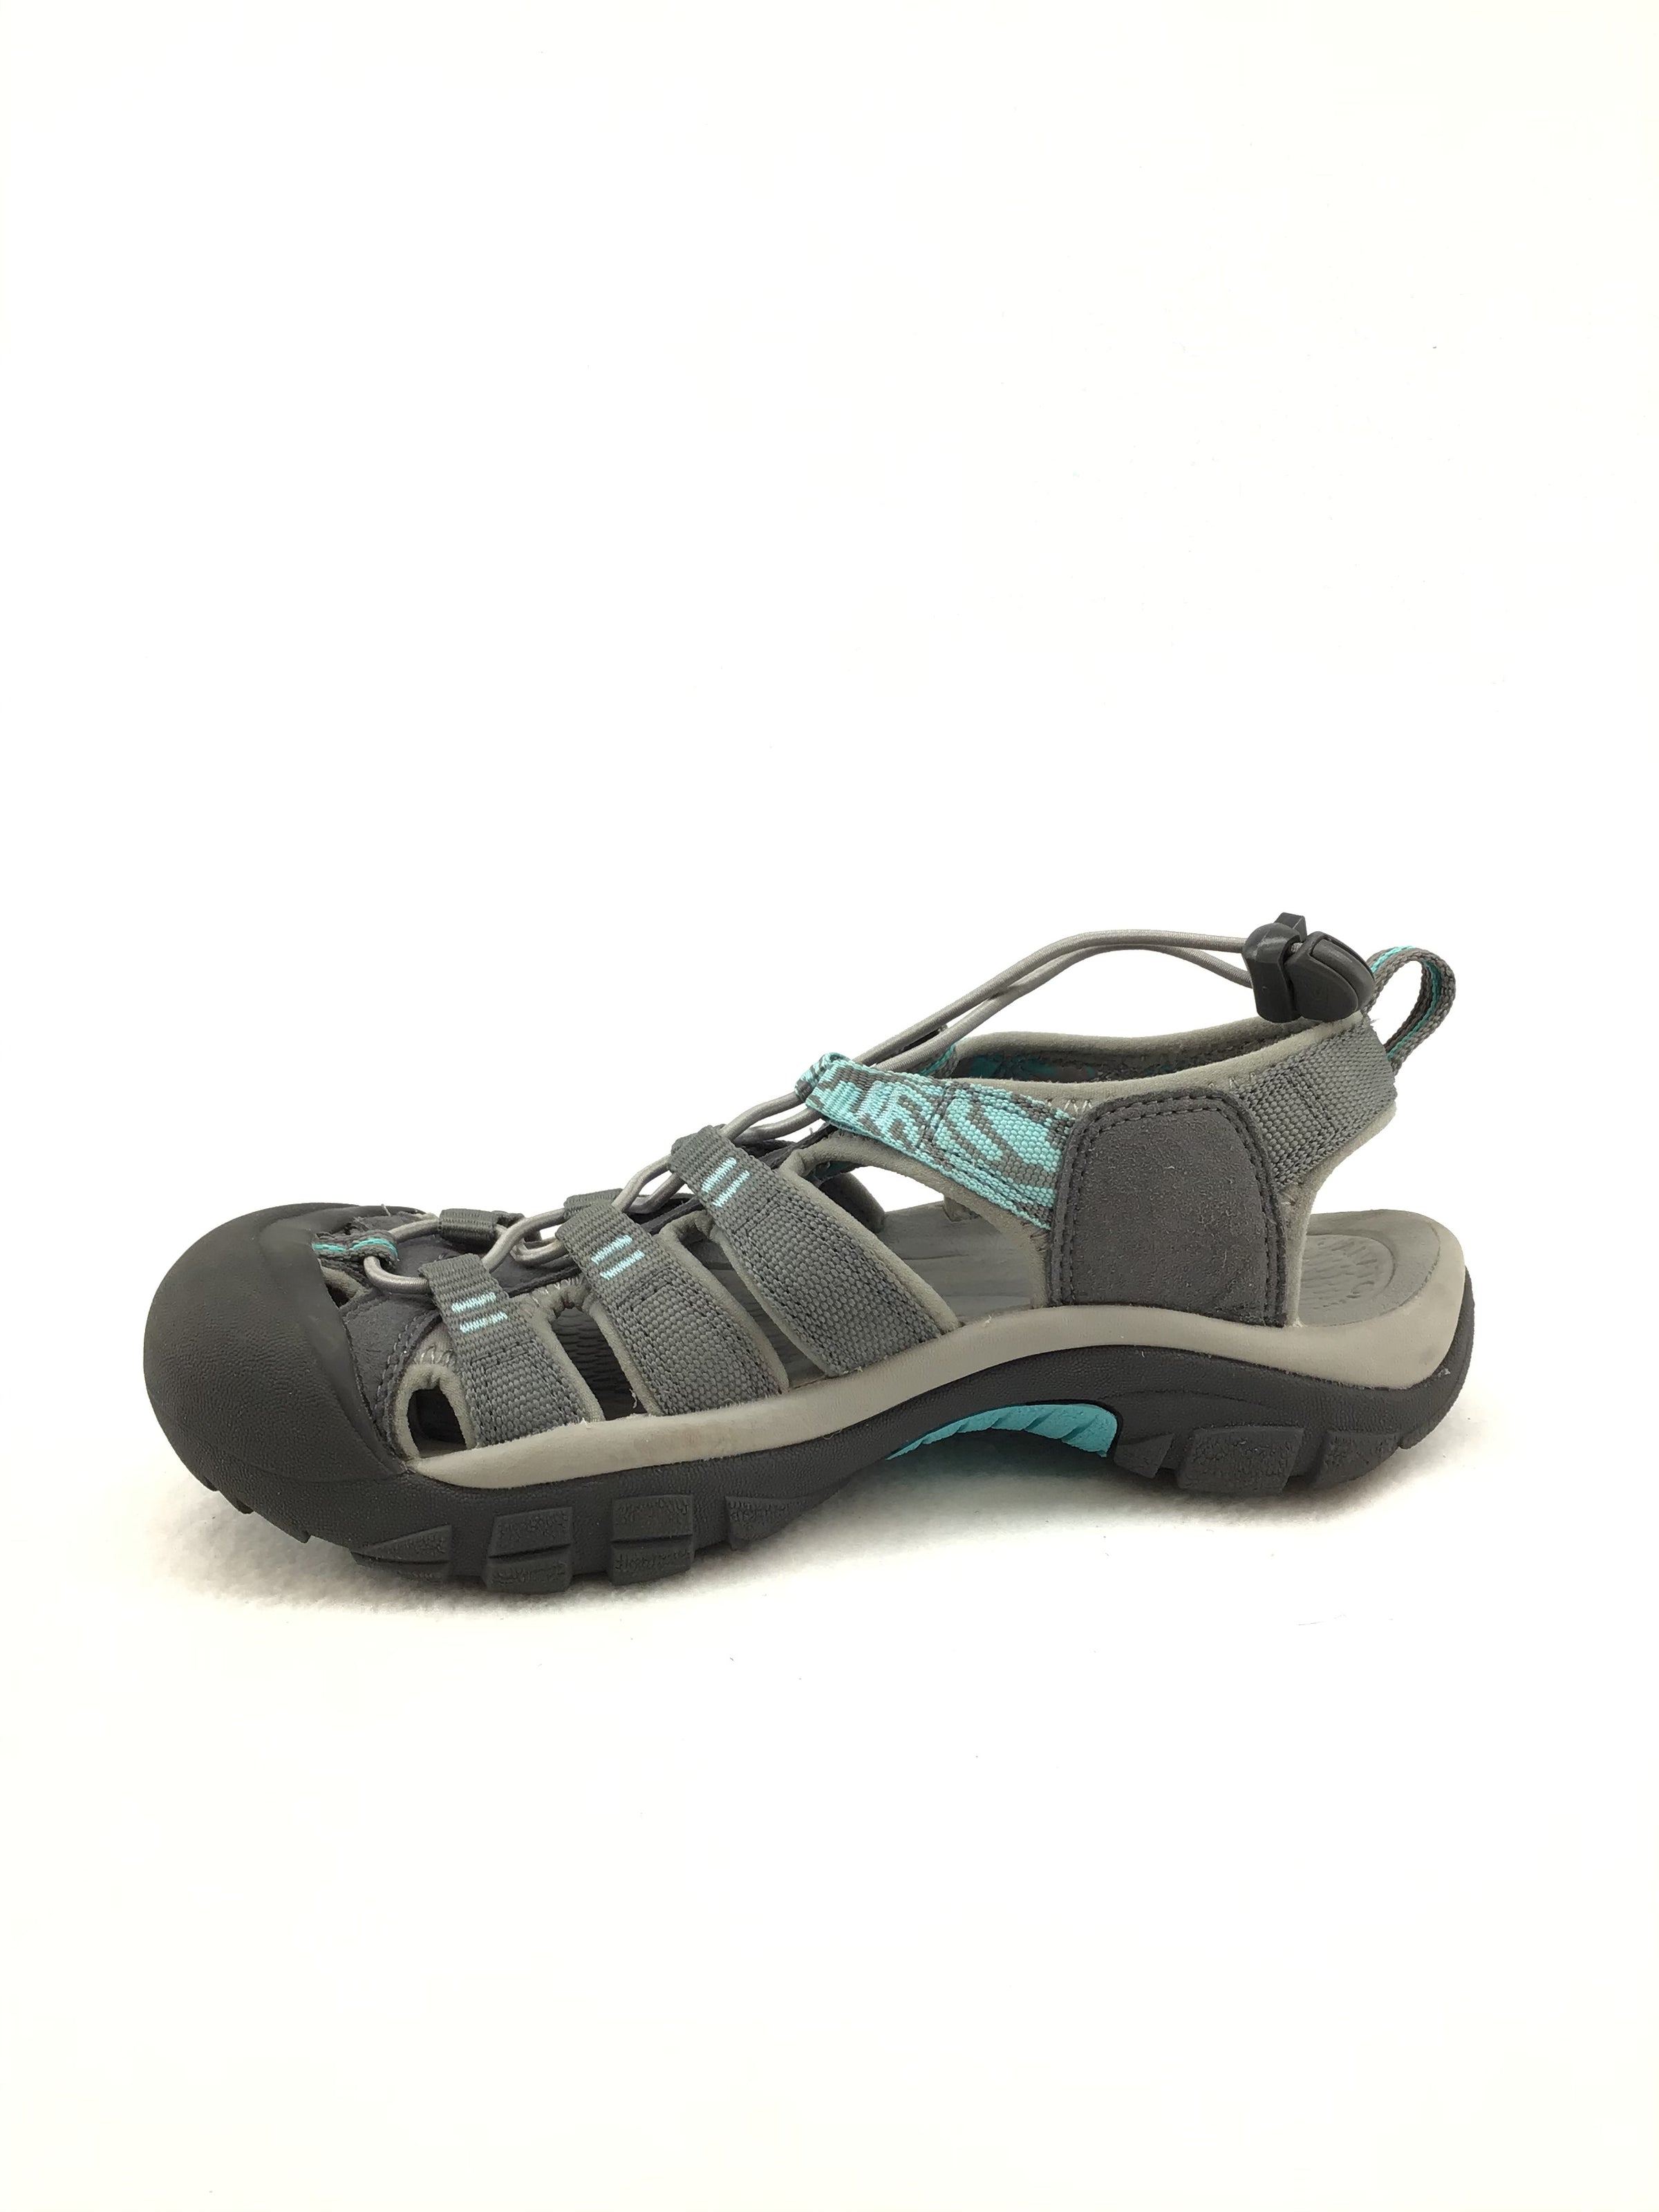 Keen Hiking Shoes Size 7